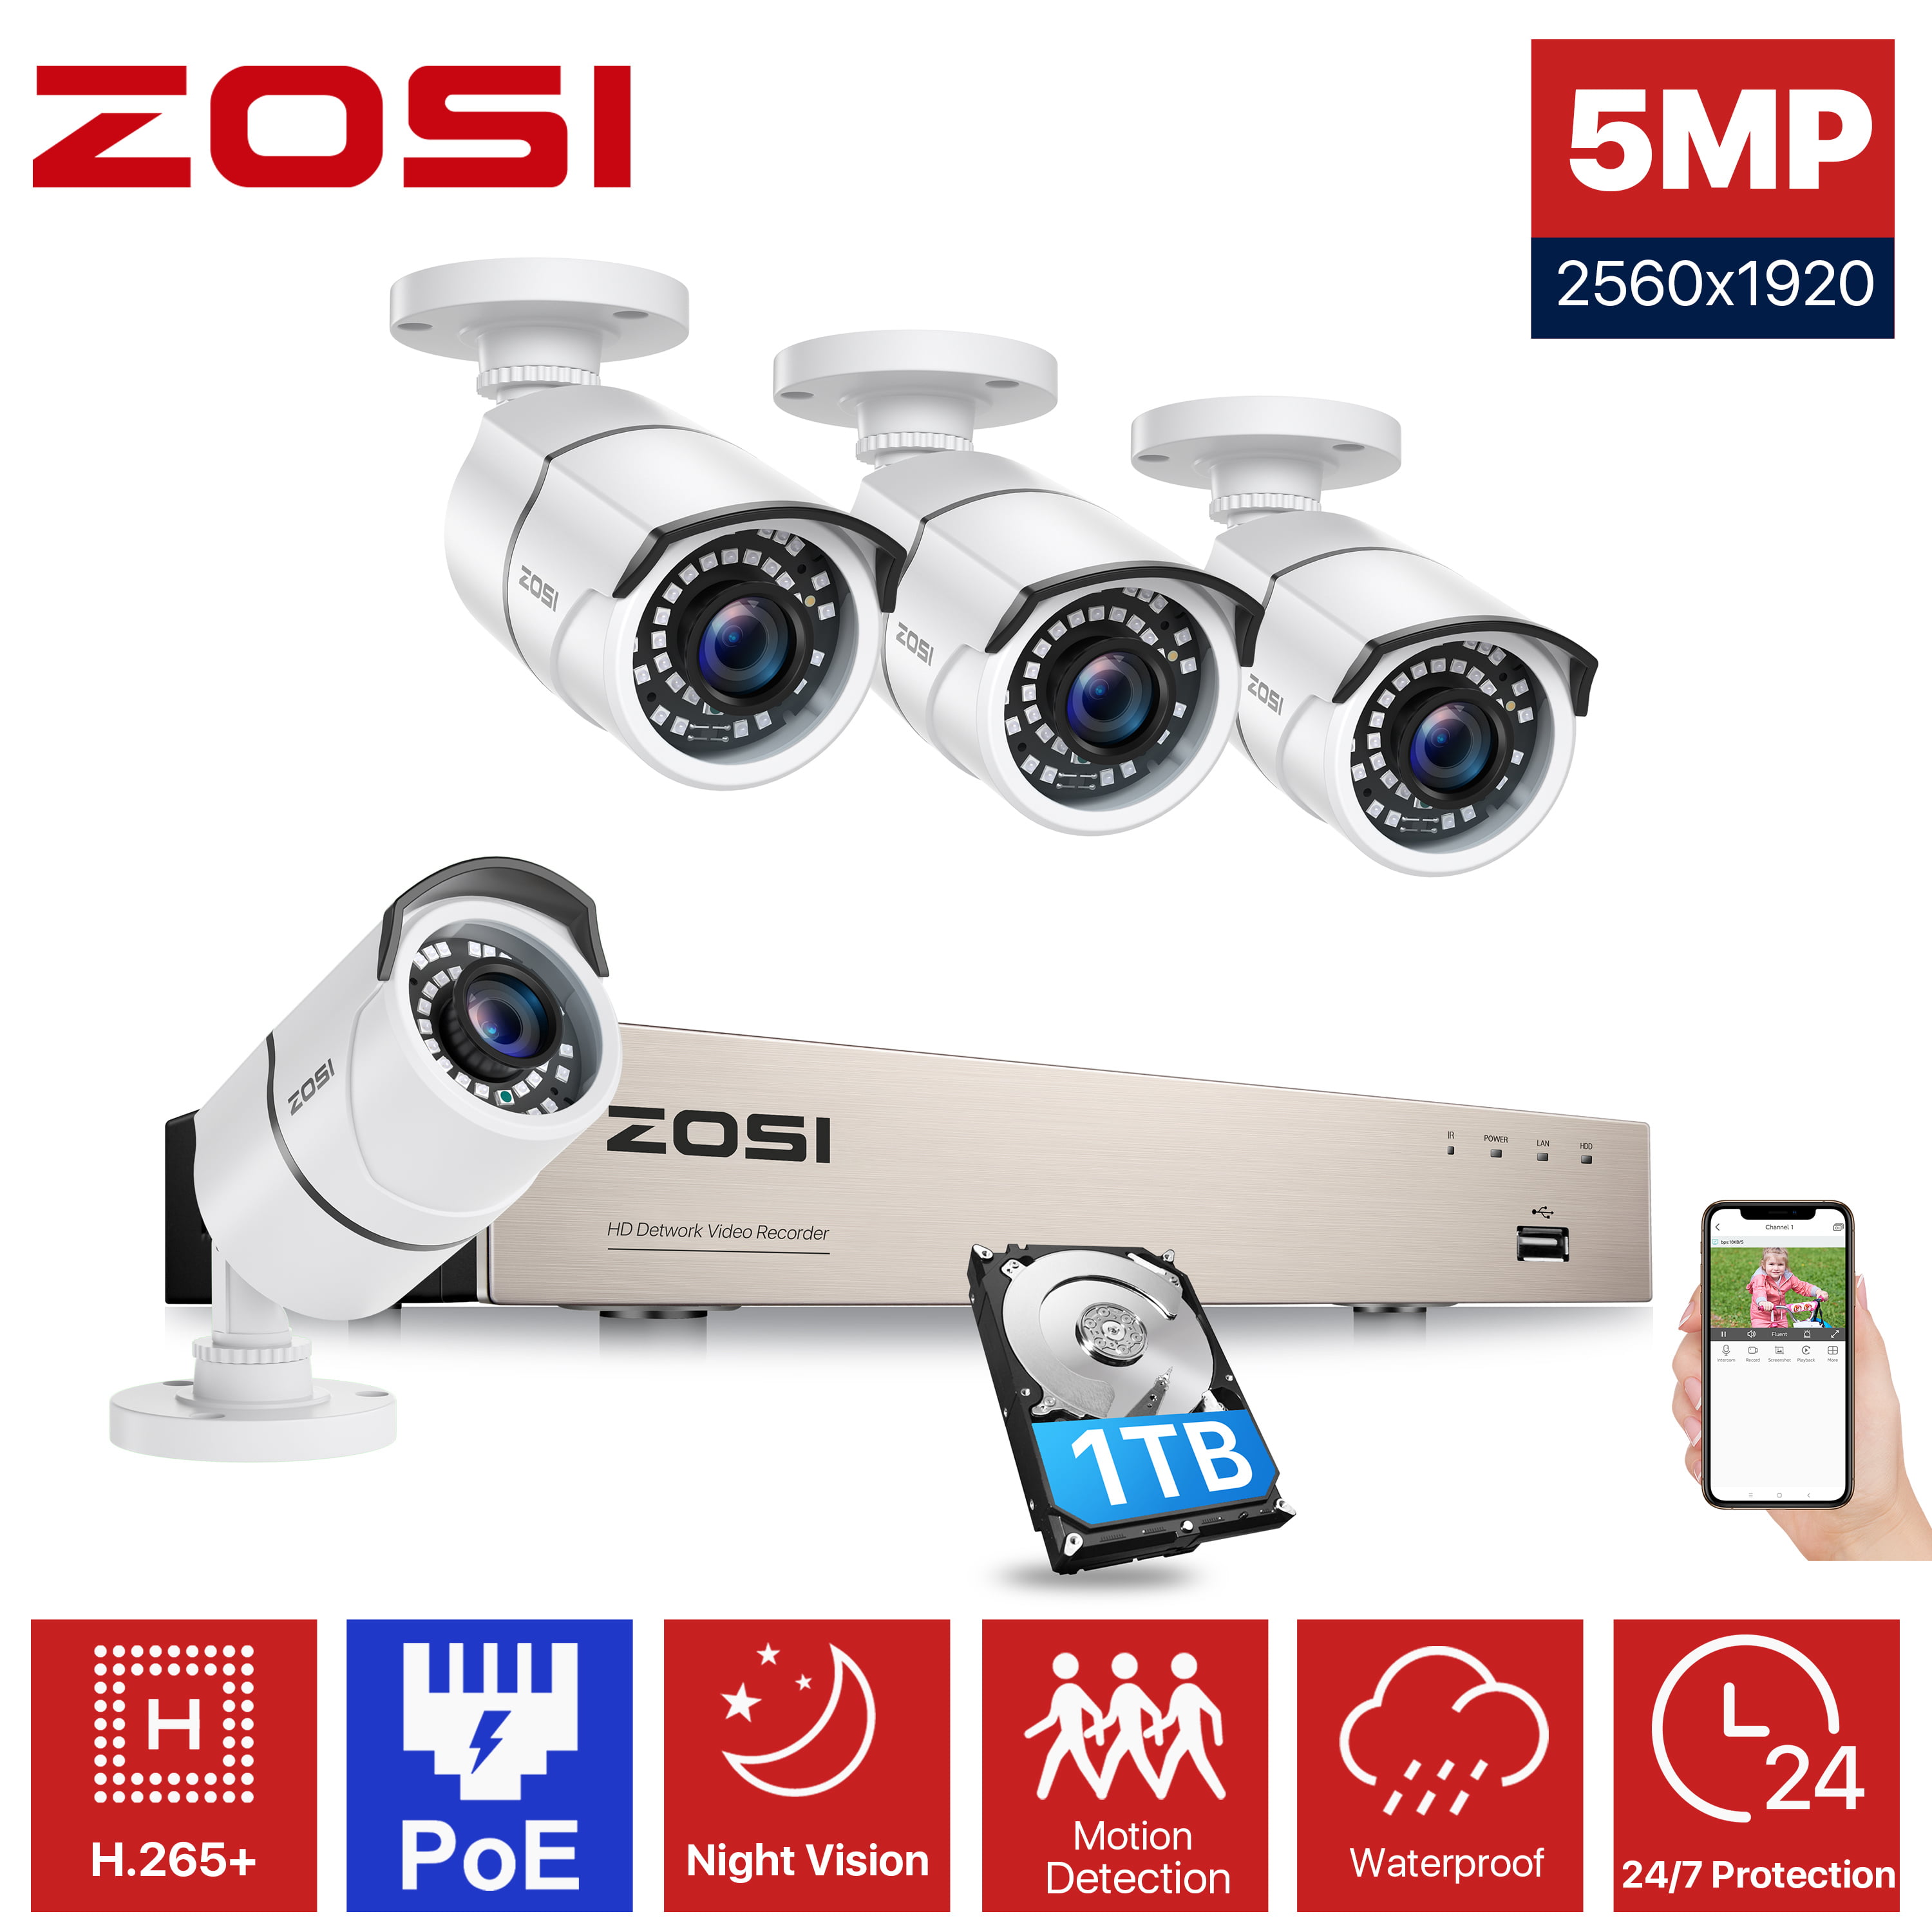 1080p Surveillance Bullet PoE Network Cameras with 120ft Long Night Vision PoE NVR Recorder with 2TB Hard Drive and 8 ZOSI 1080p PoE Home Security Camera System Outdoor Indoor,8CH 5MP H.265 